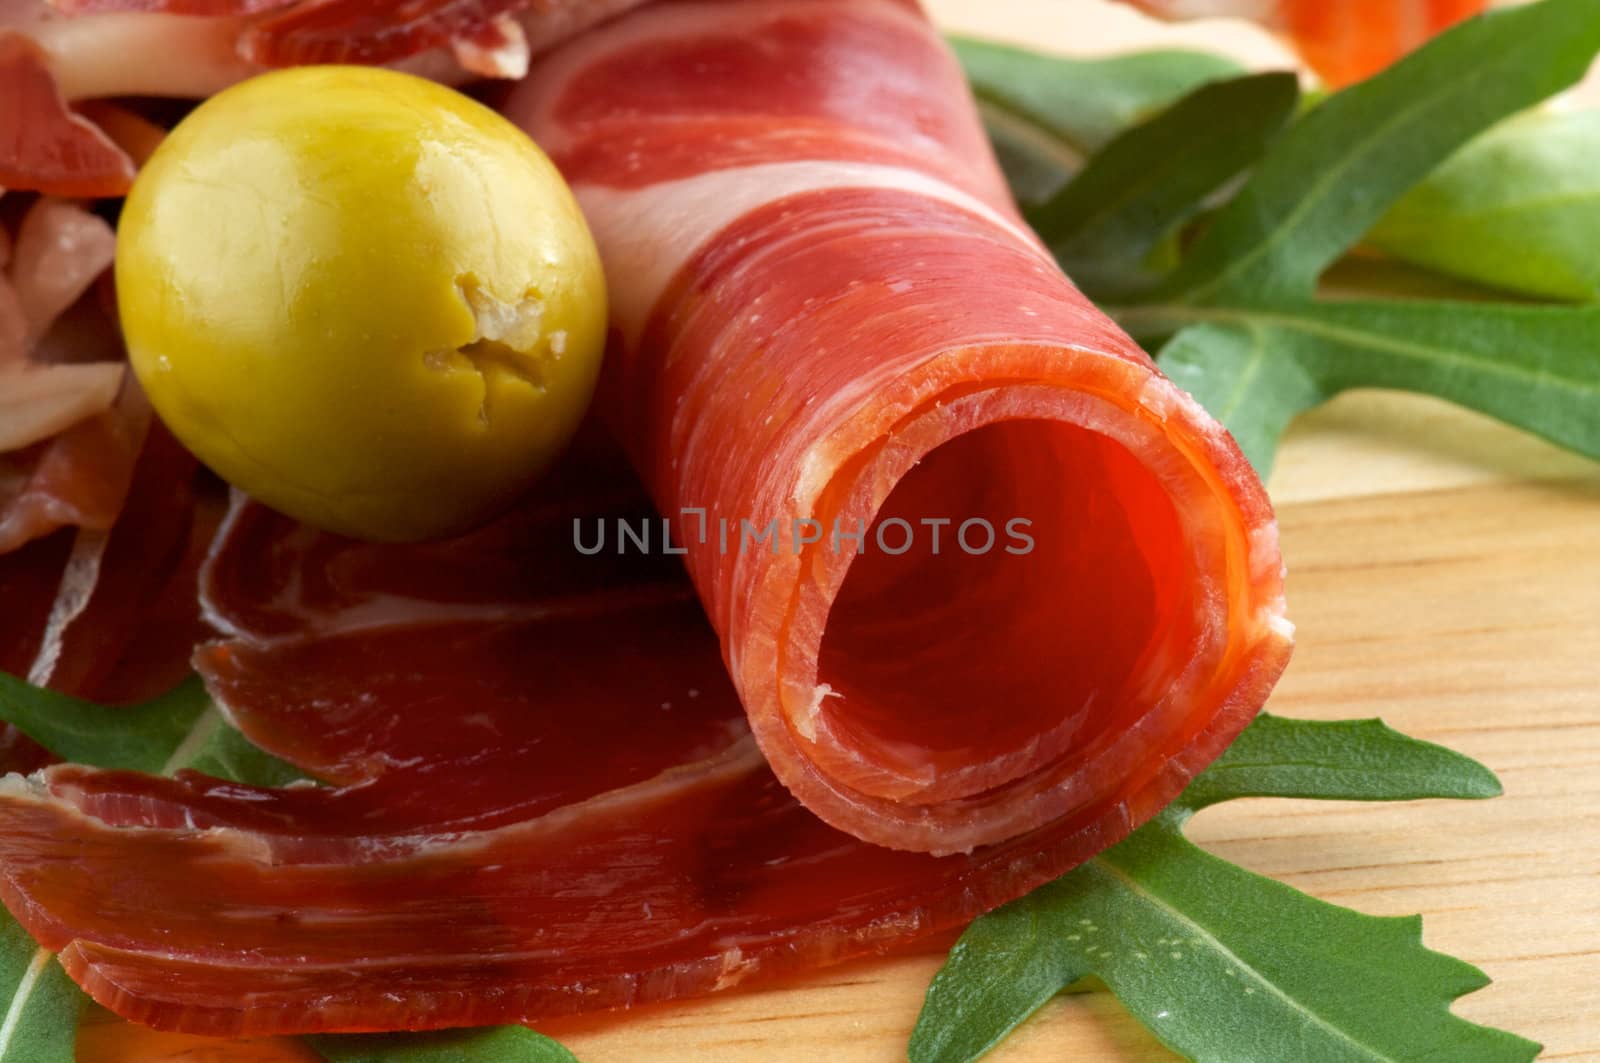 Slices of jamon and olives close up on wooden background